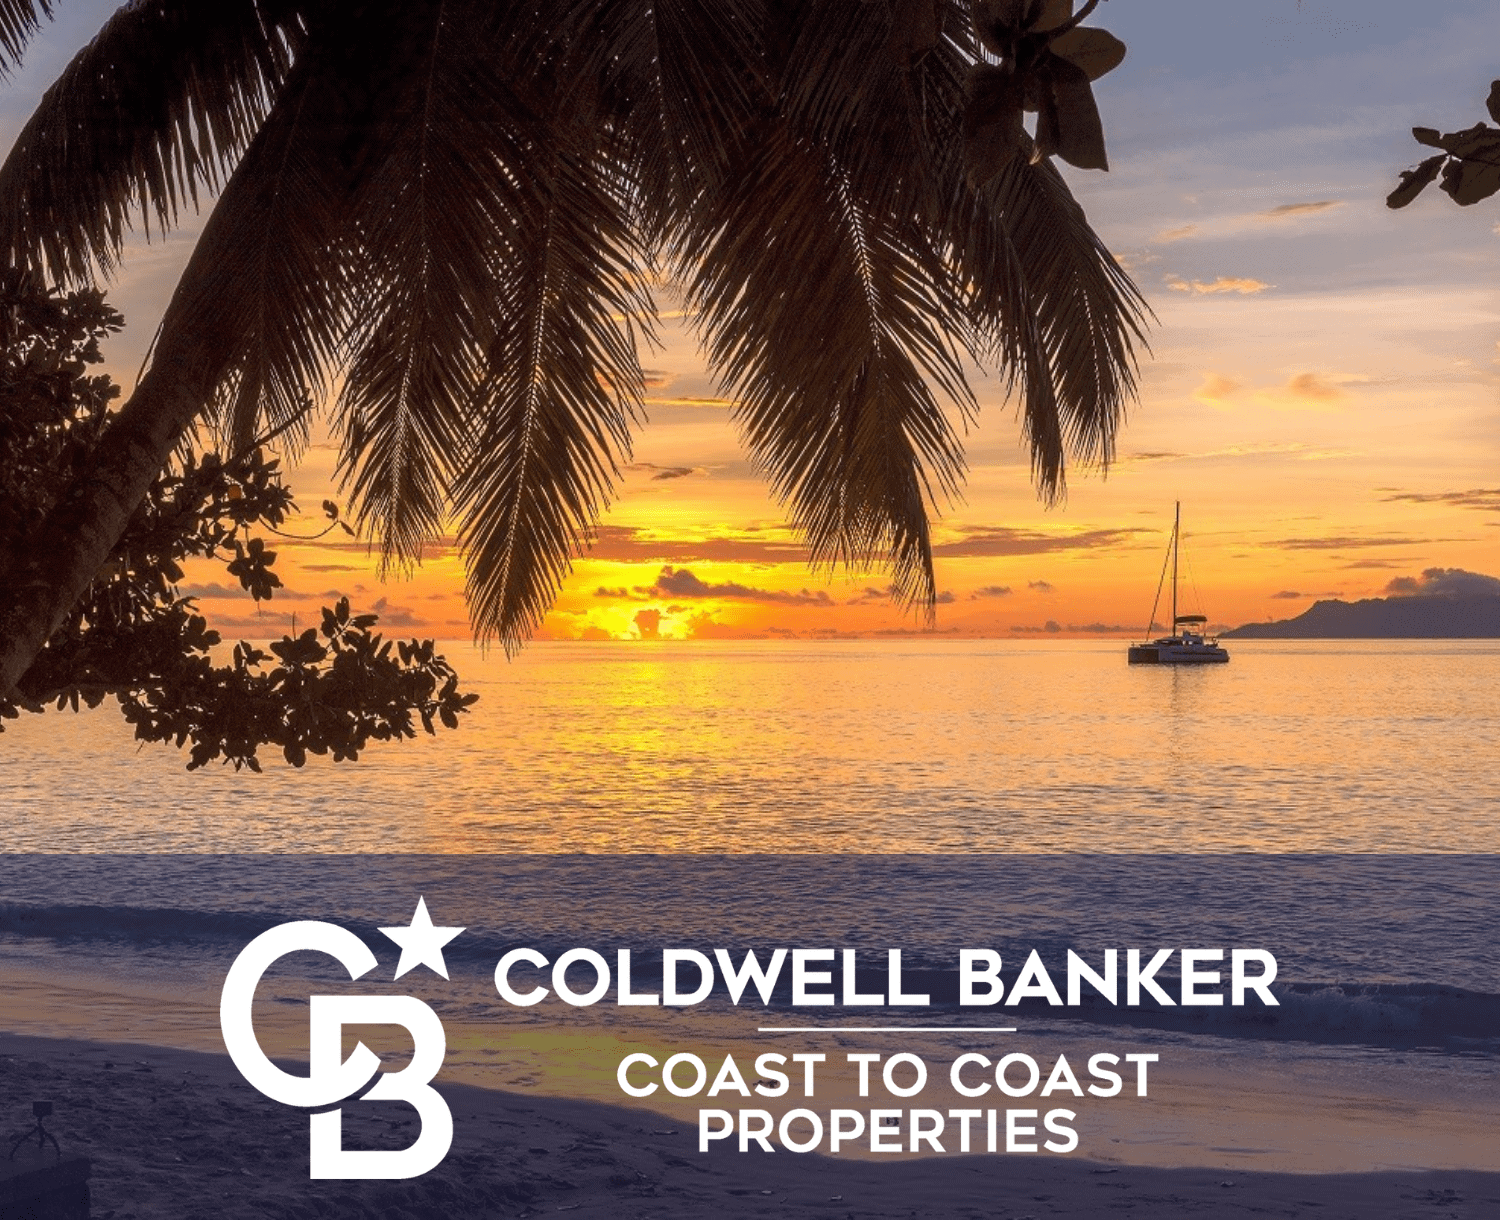 Coldwell Banker Coast to Coast Properties